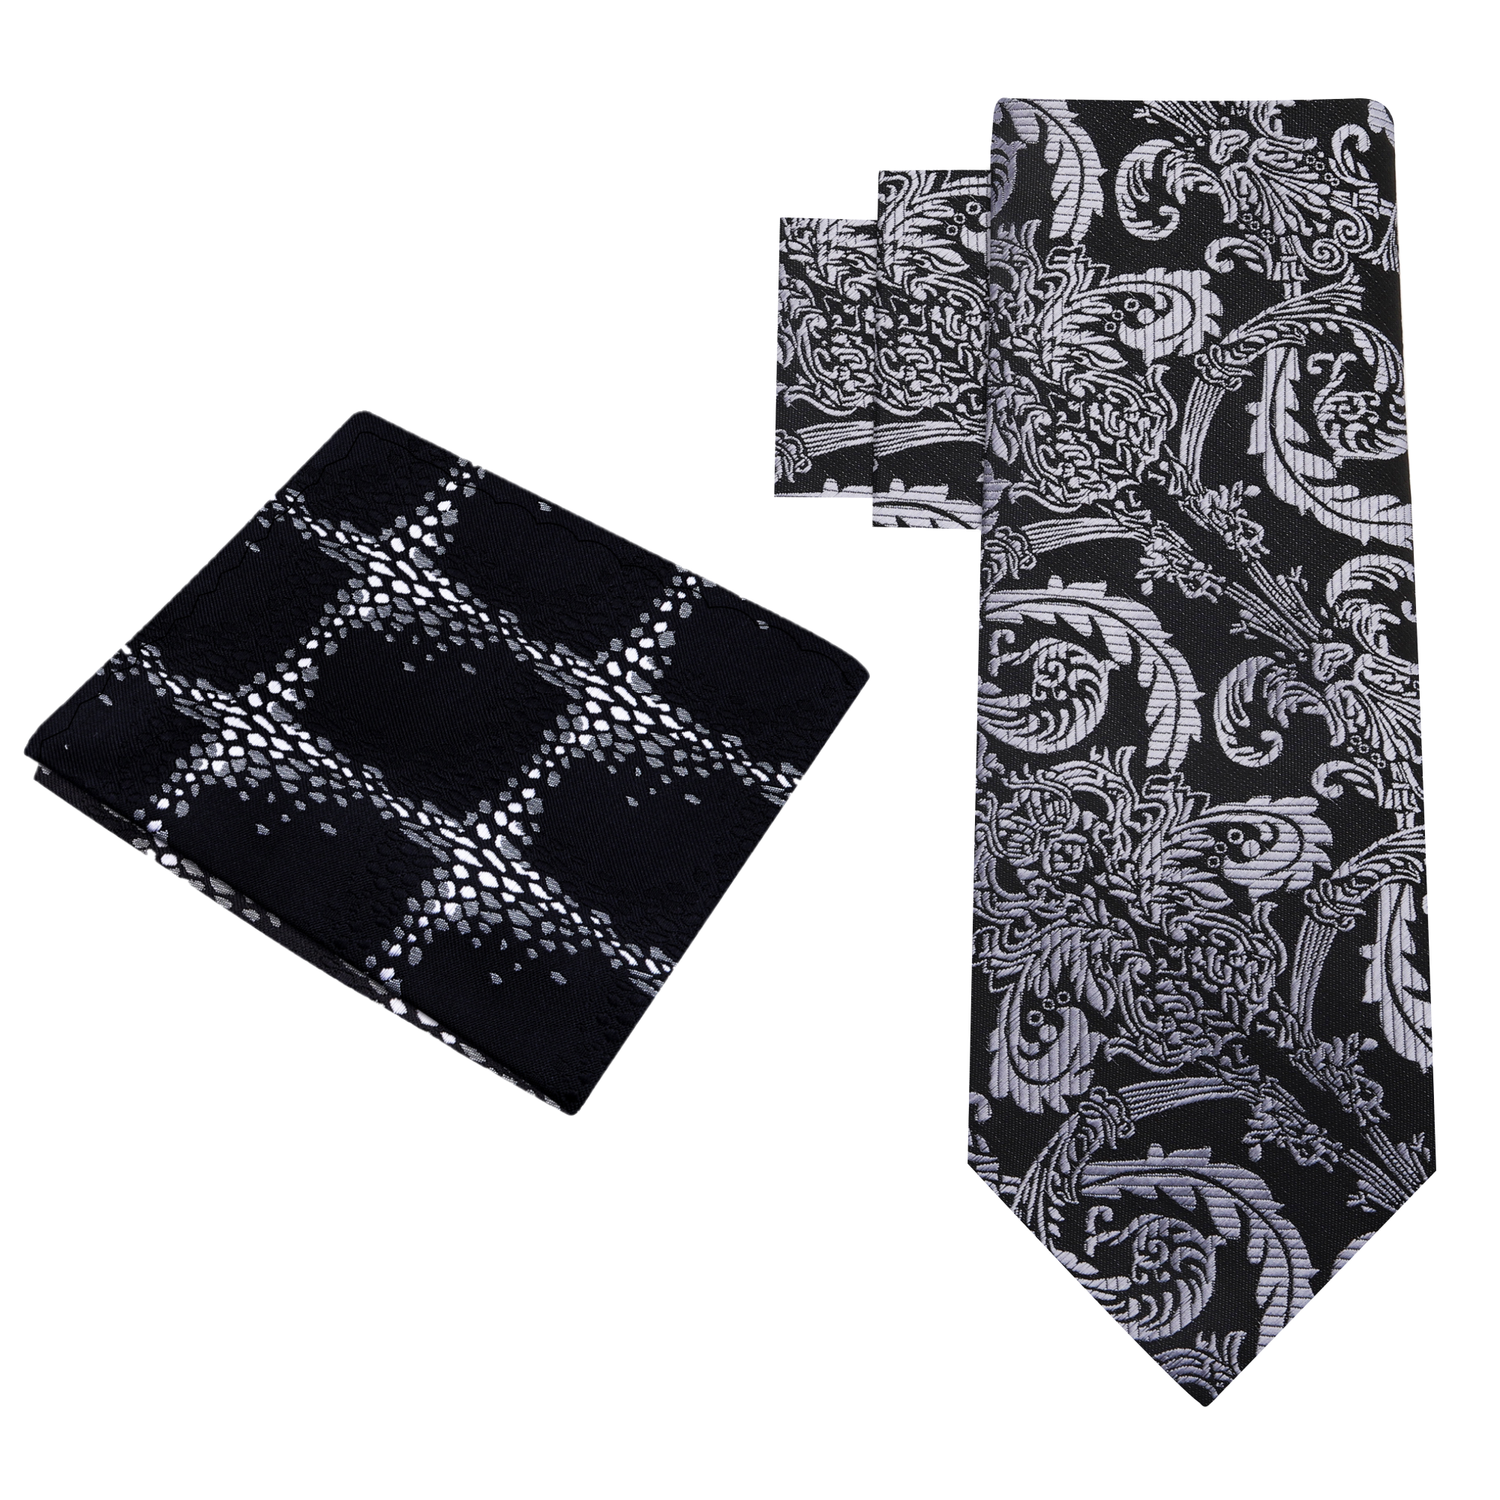 Alt View: Black, Grey Floral Necktie and Accenting Square